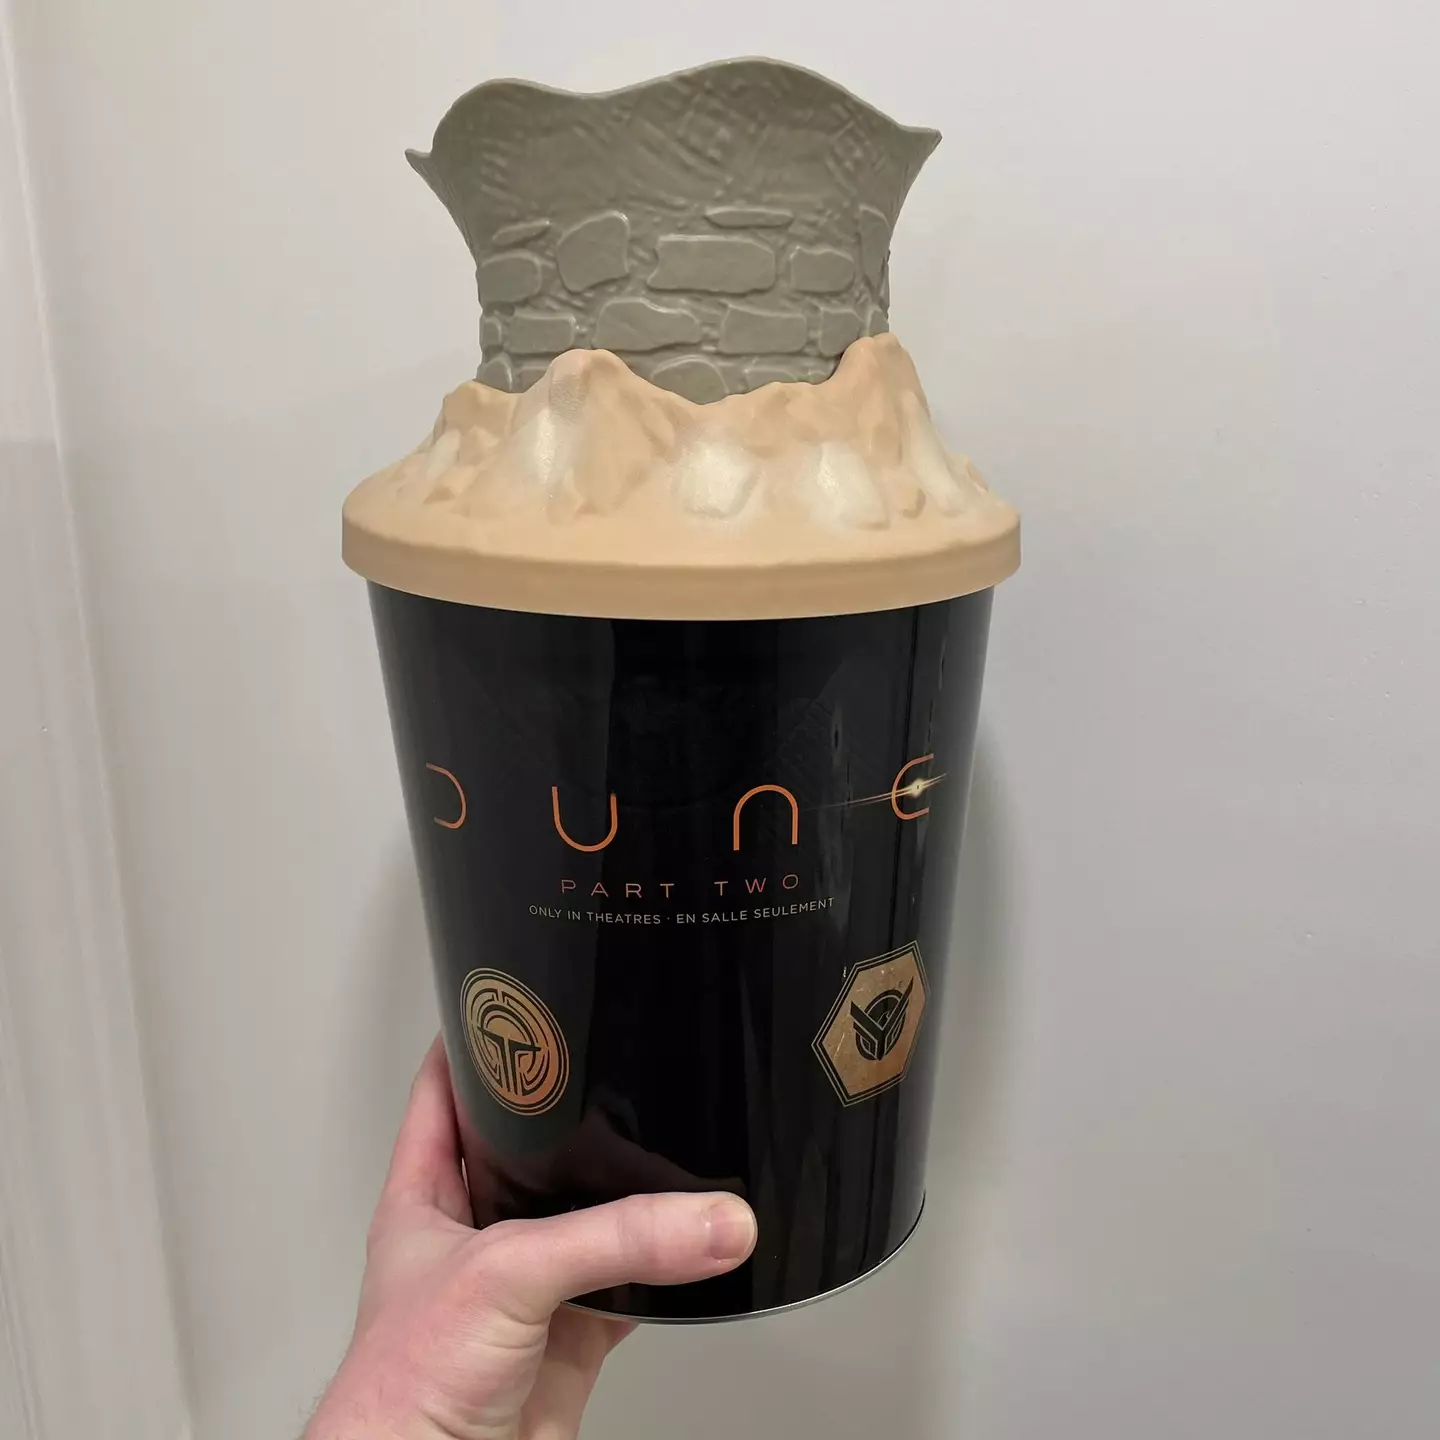 The Dune: Part Two popcorn buckets have piqued the interest of cinemagoers.